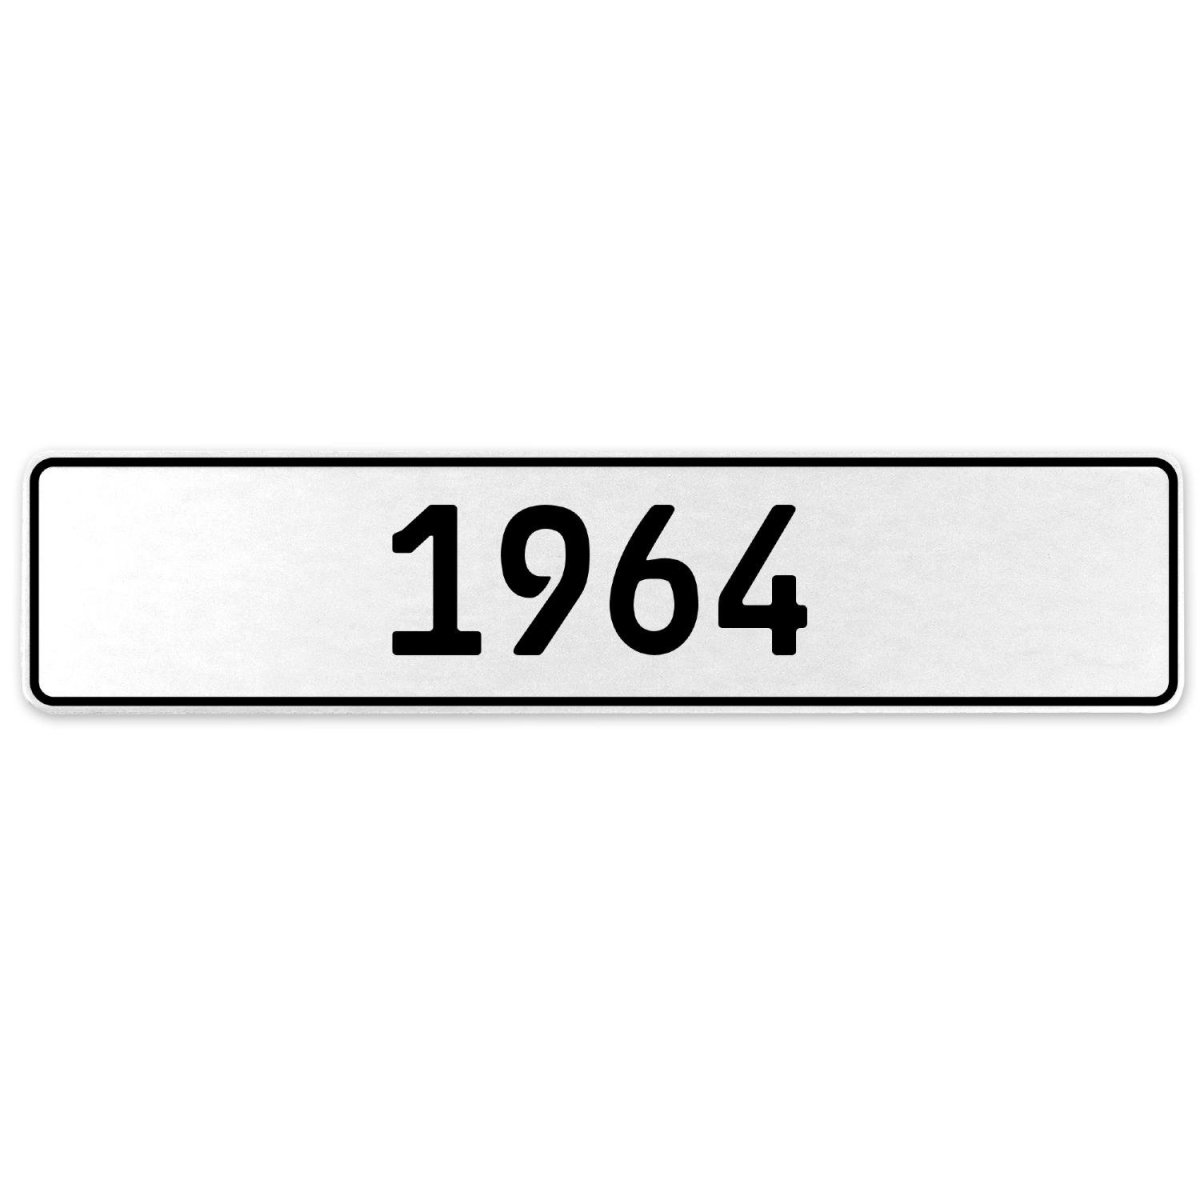 553207 1964 Year - White Aluminum Street Sign Mancave Euro Plate Name Door Sign Wall